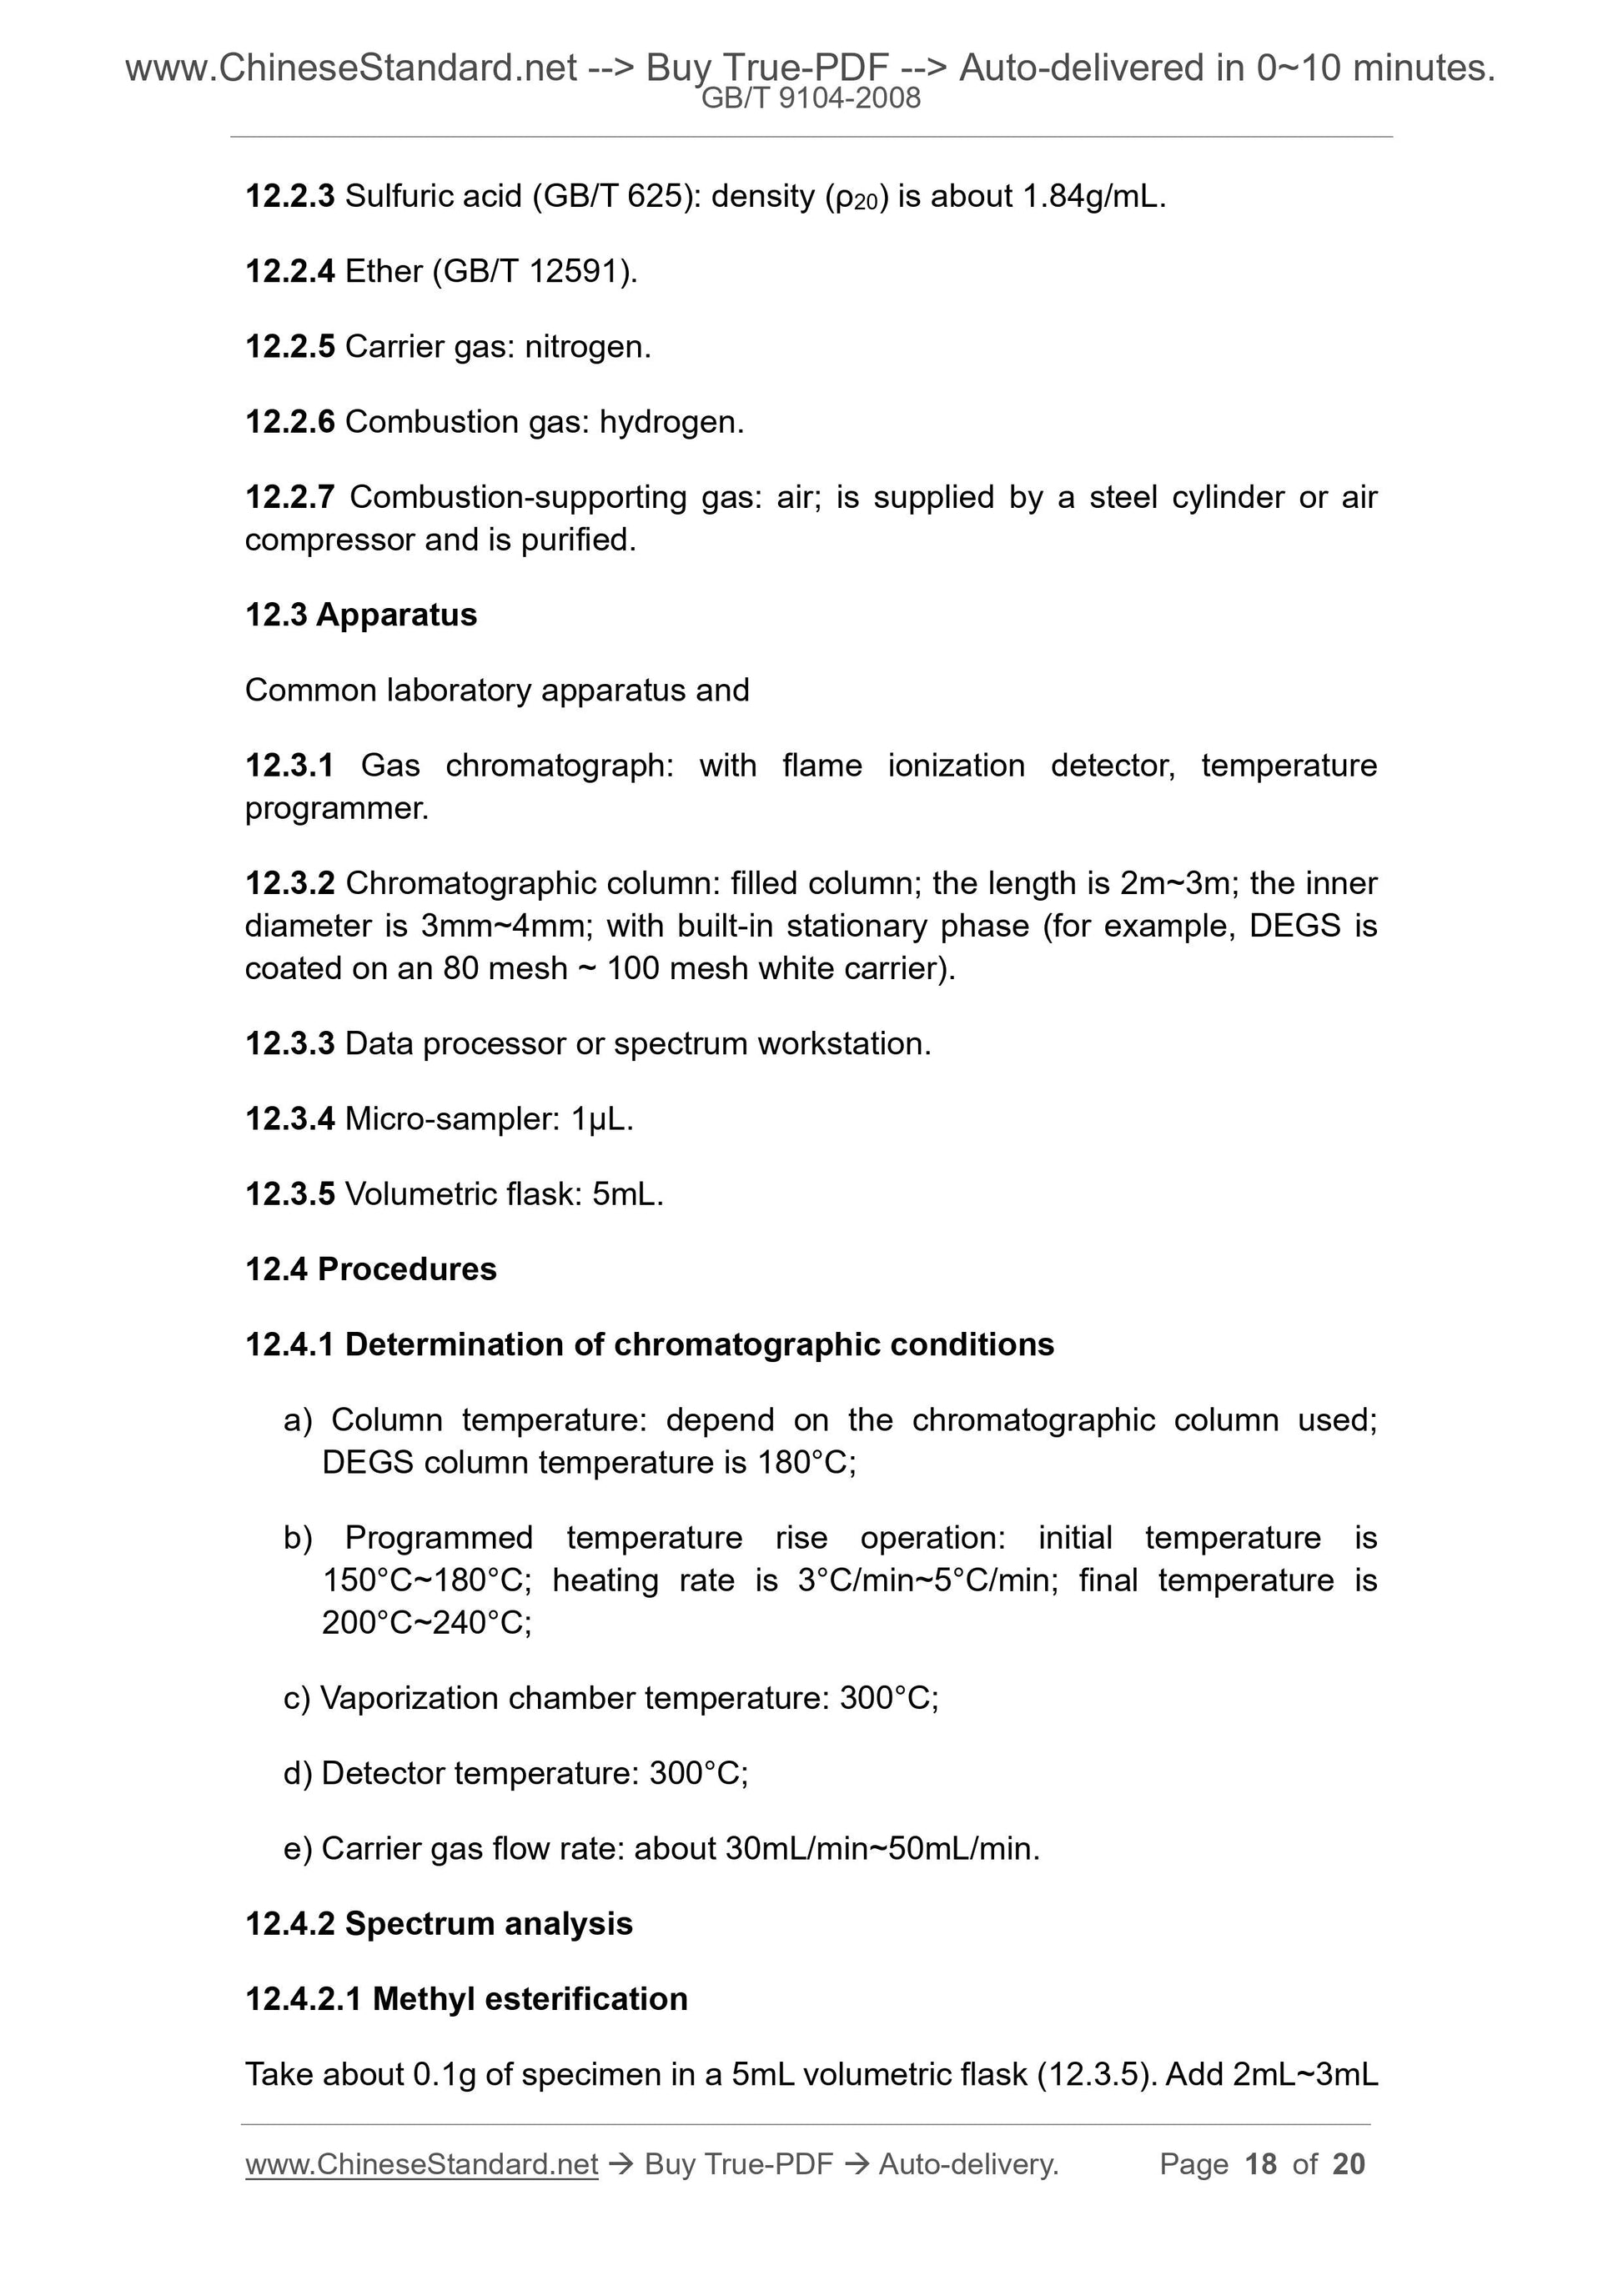 GB/T 9104-2008 Page 9